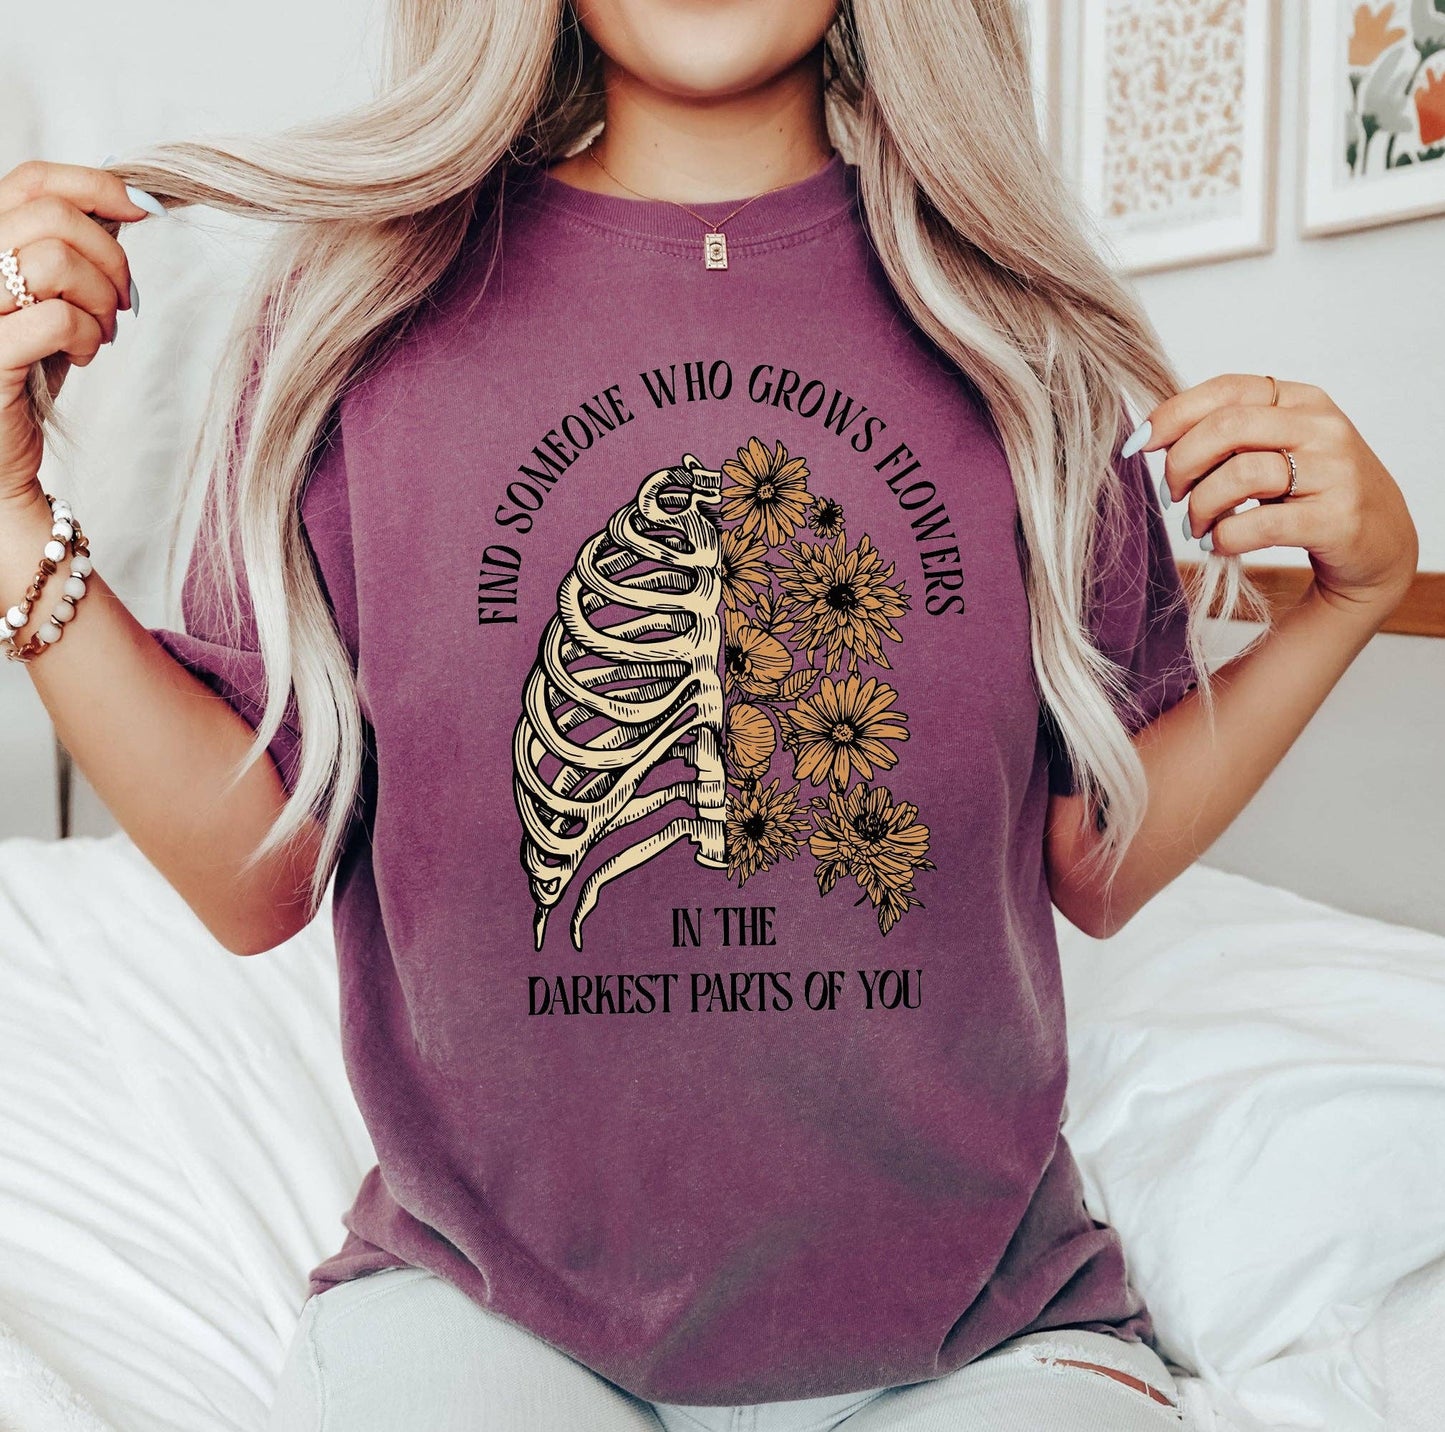 Find Someone Who Grows Flowers, Skeleton, Cowgirl, Tshirt: Small / Pepper Dark Gray